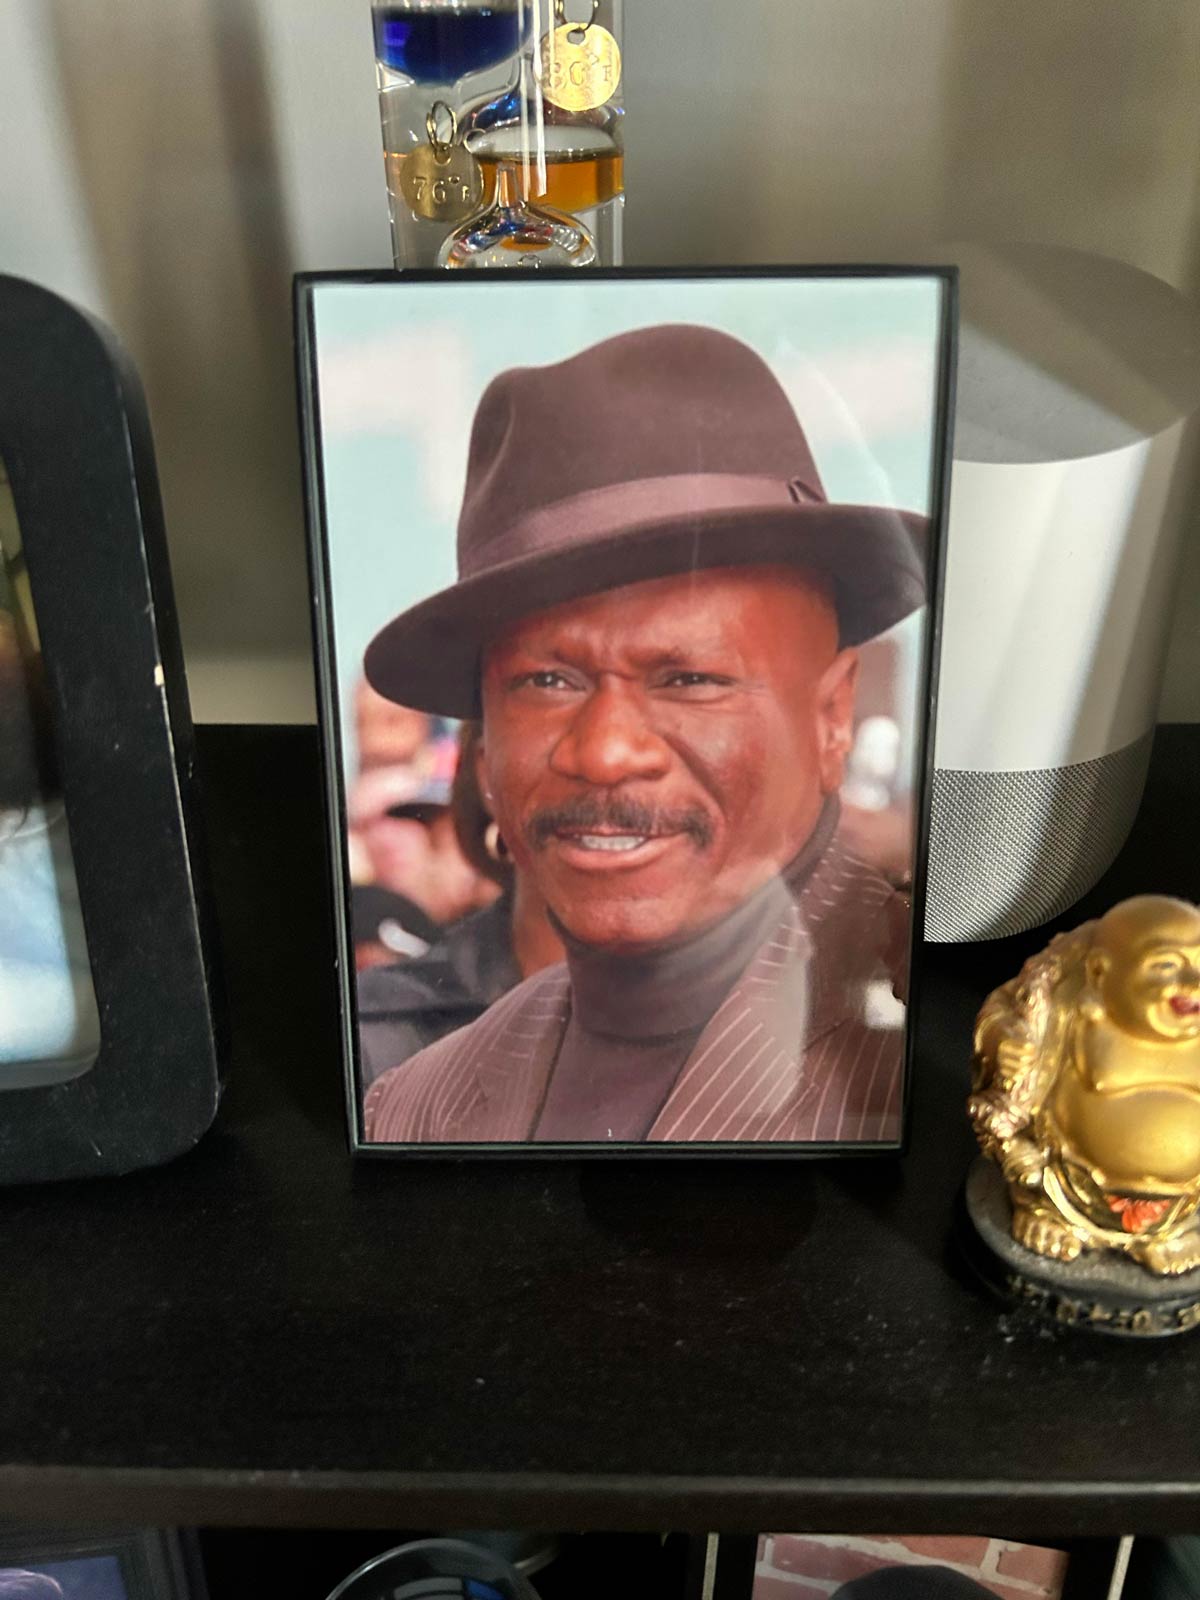 My wife's best friend has a framed photo of Ving Rhames on the shelf with all his family photos